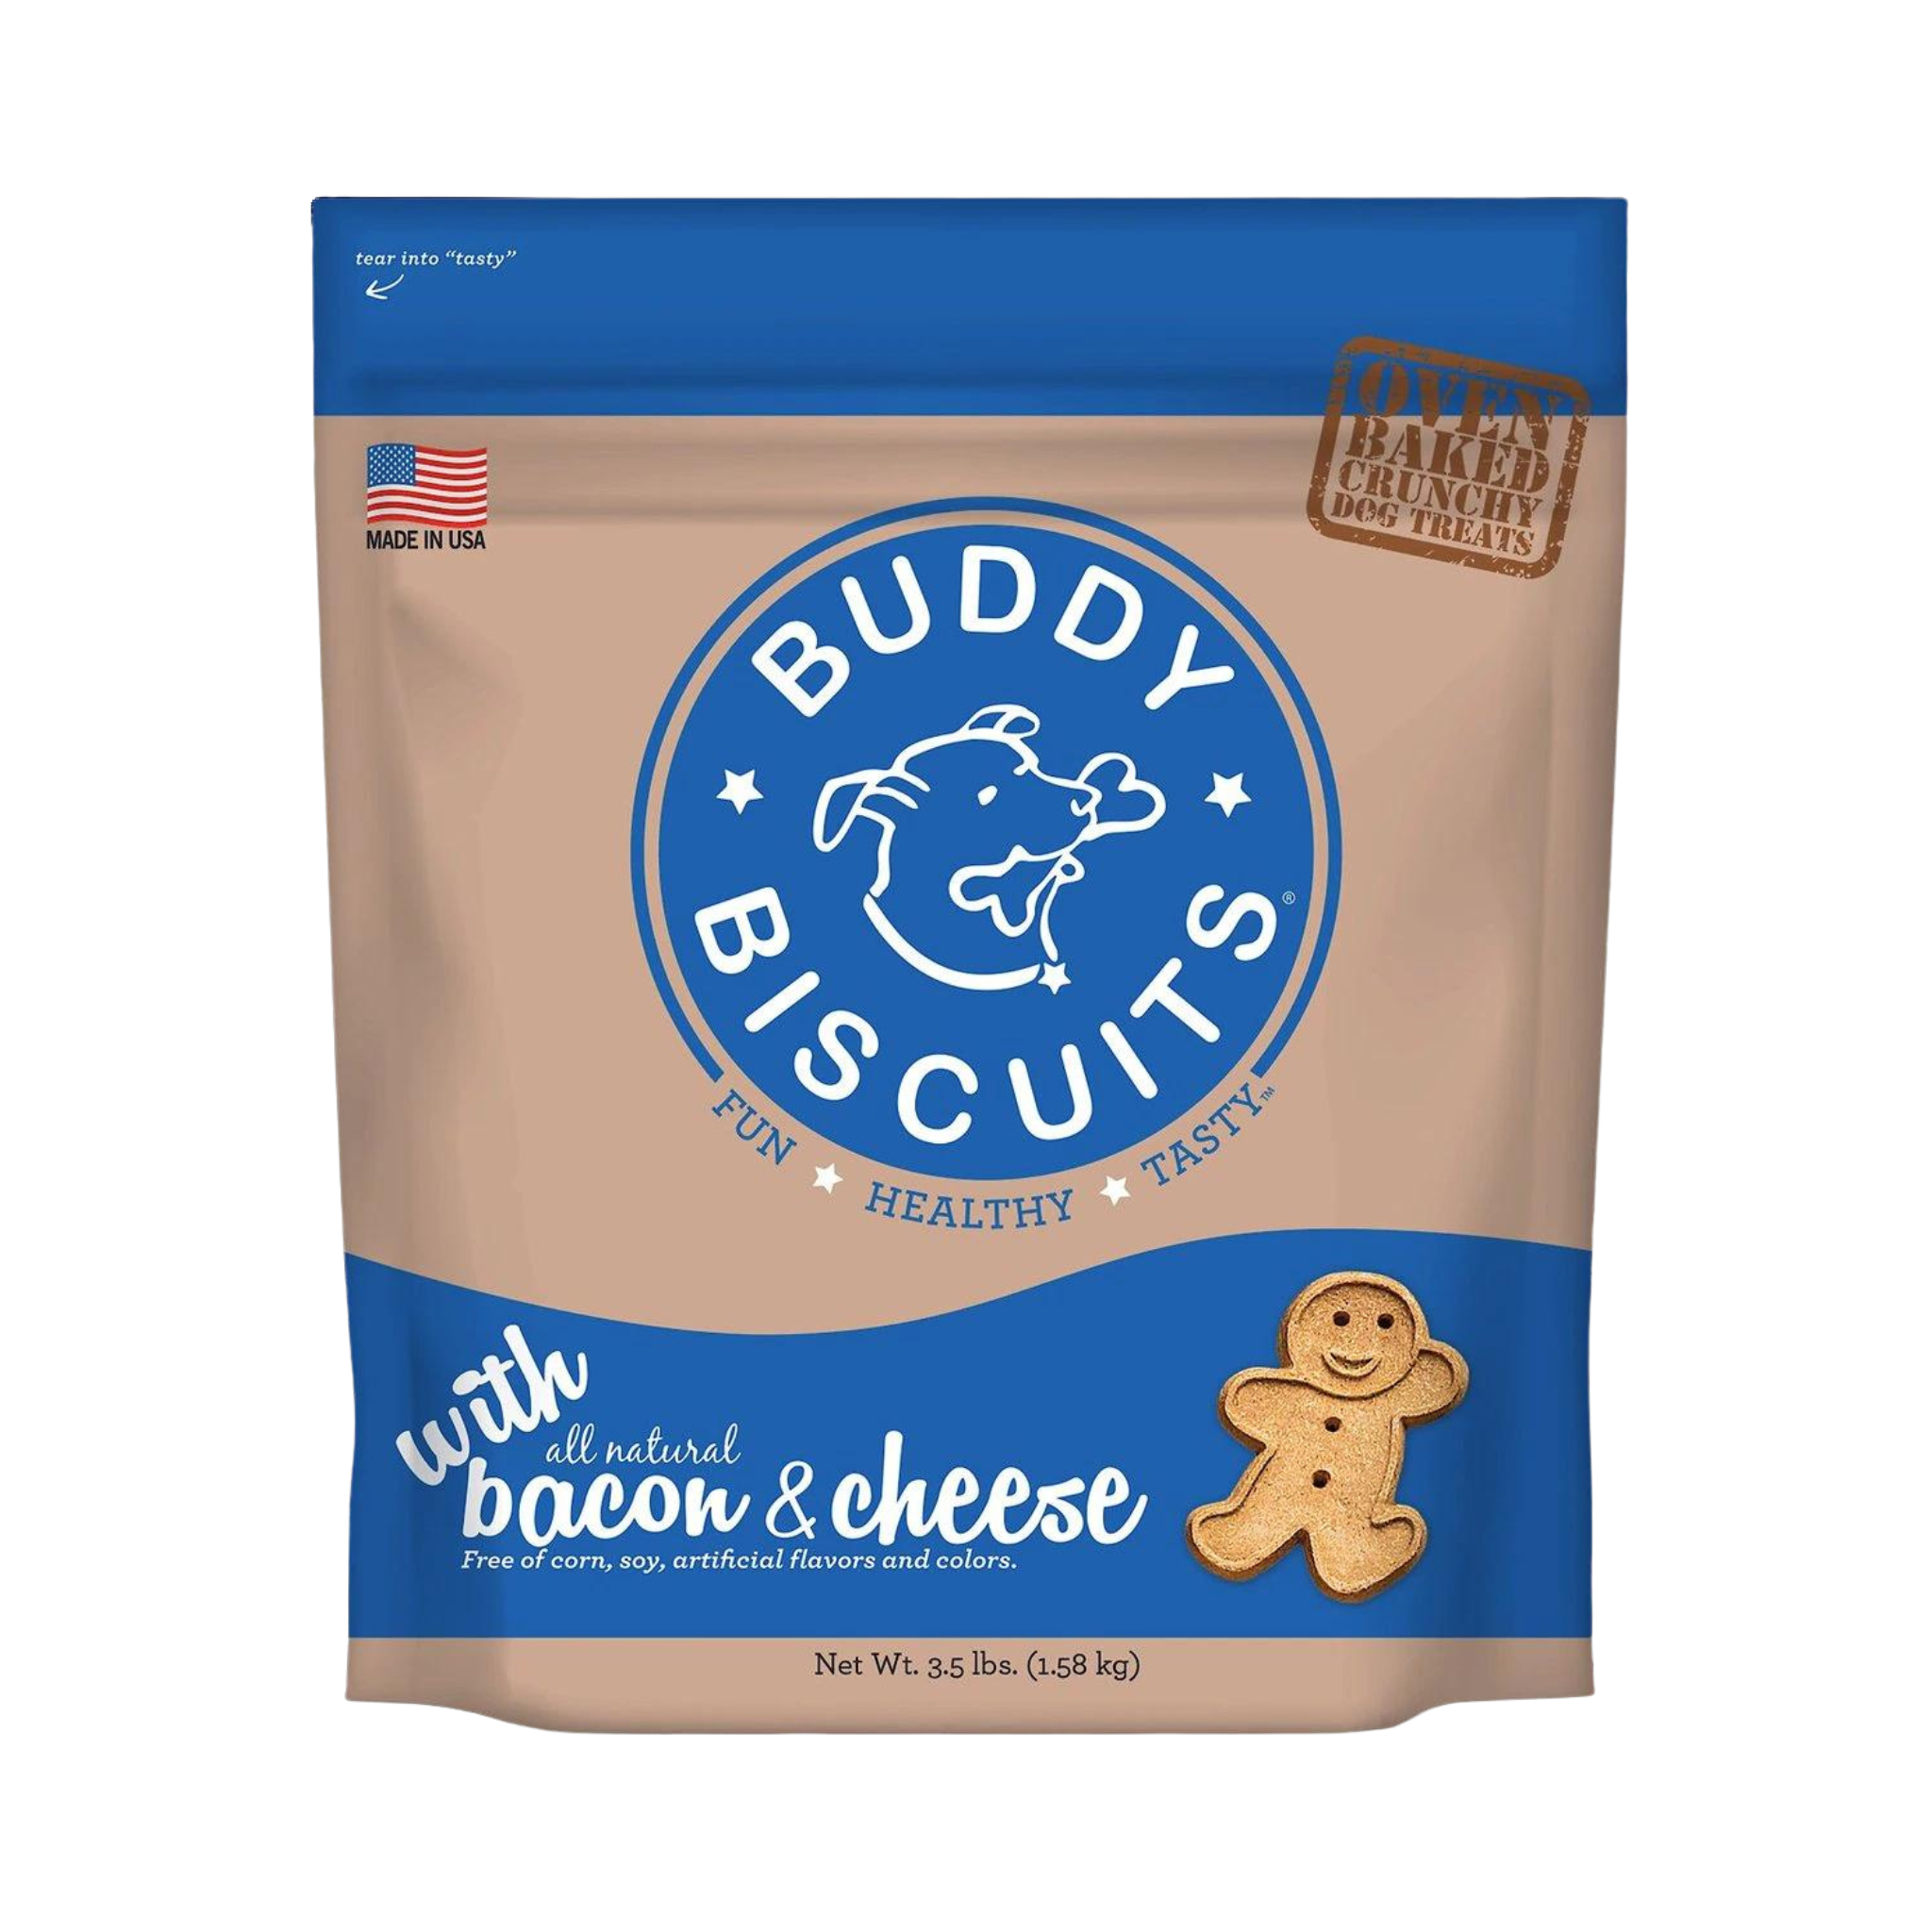 Buddy Biscuits- Bacon & Cheese